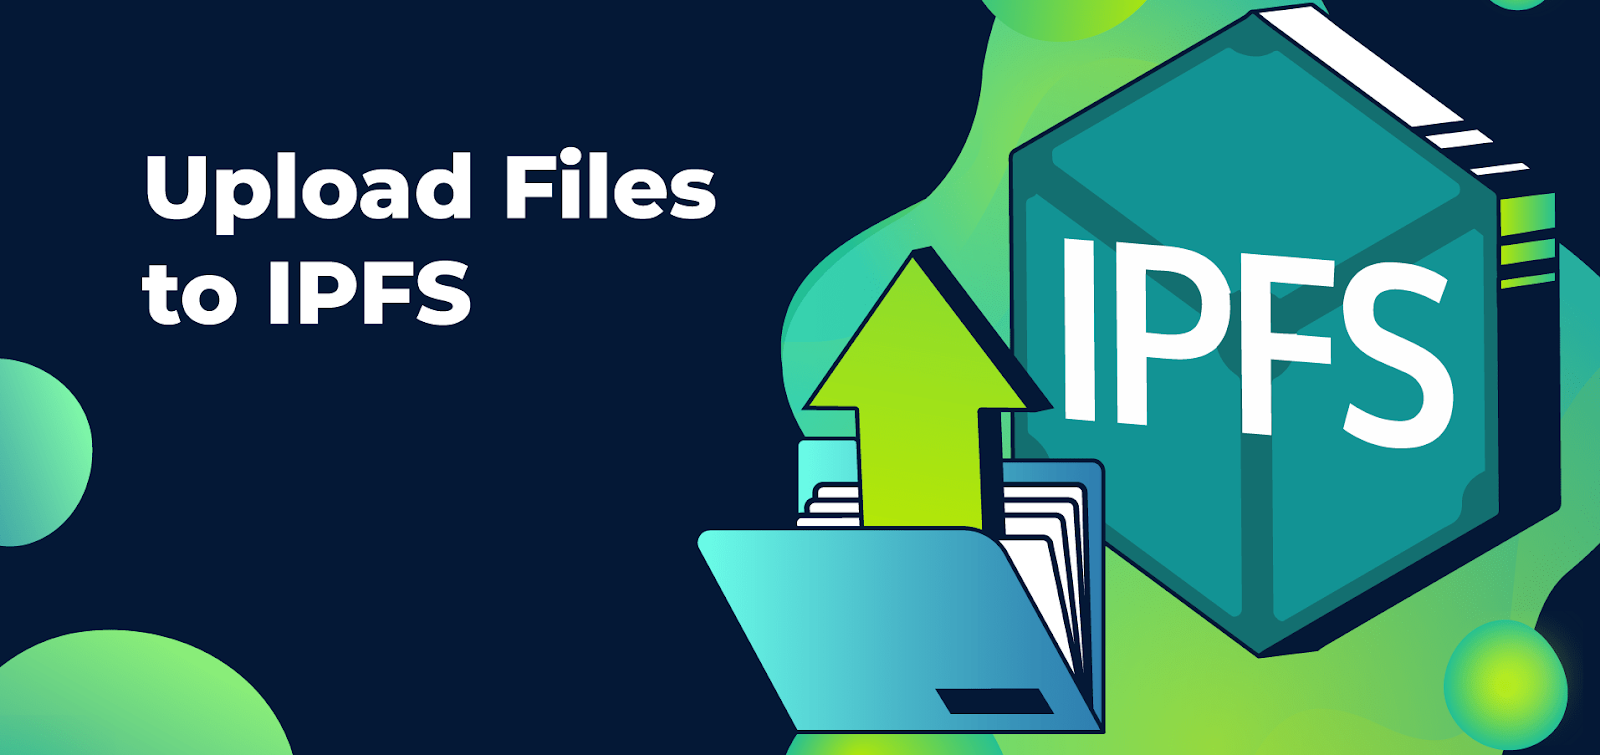 Title - Upload Files to IPFS